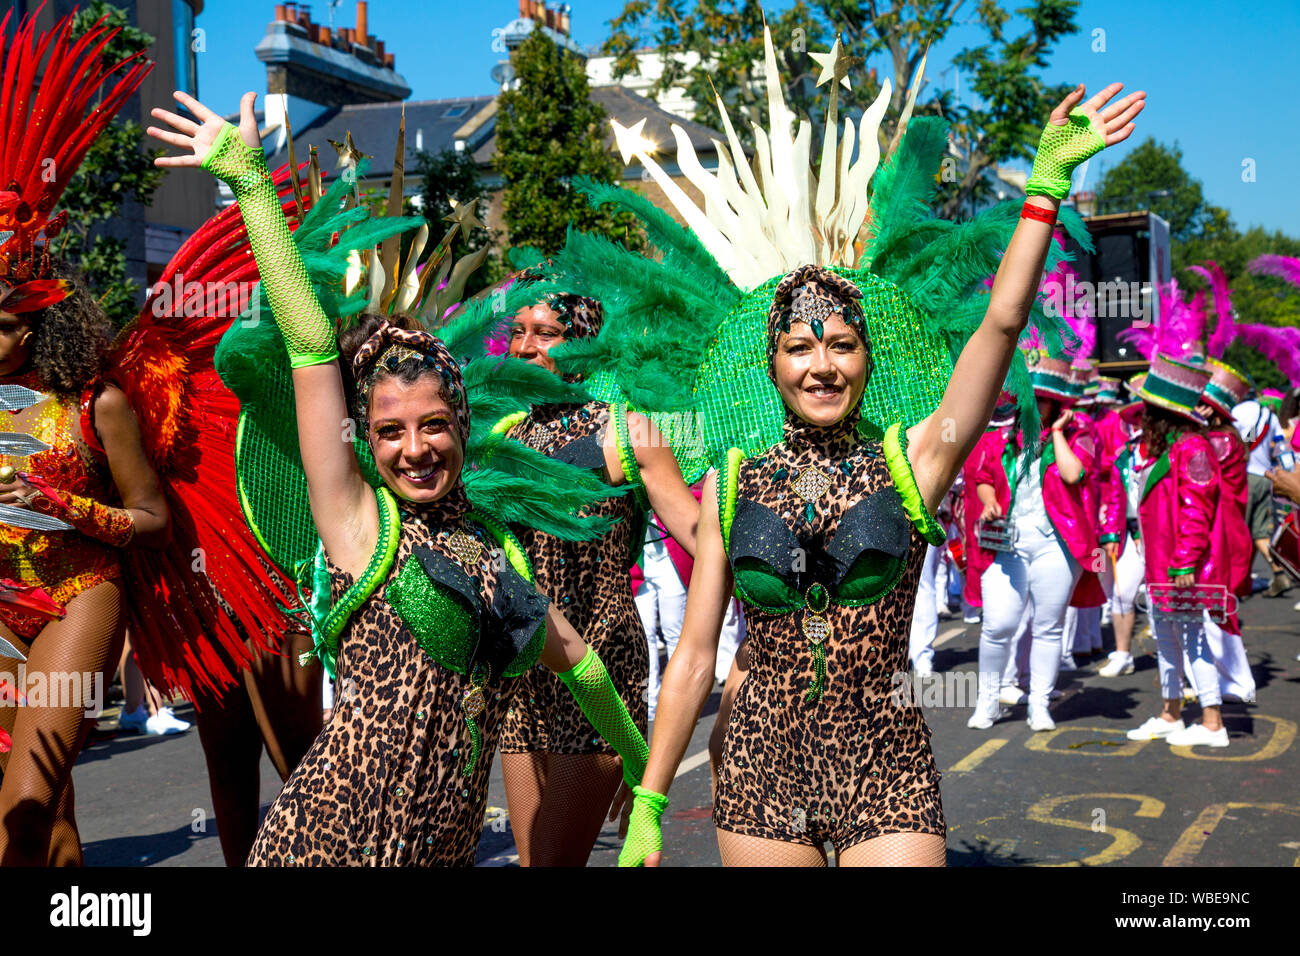 26 August 2019 - Women dressed up in feather collars and leopard print leotards waving, Notting Hill Carnival on a hot Bank Holiday Monday, London, UK Stock Photo